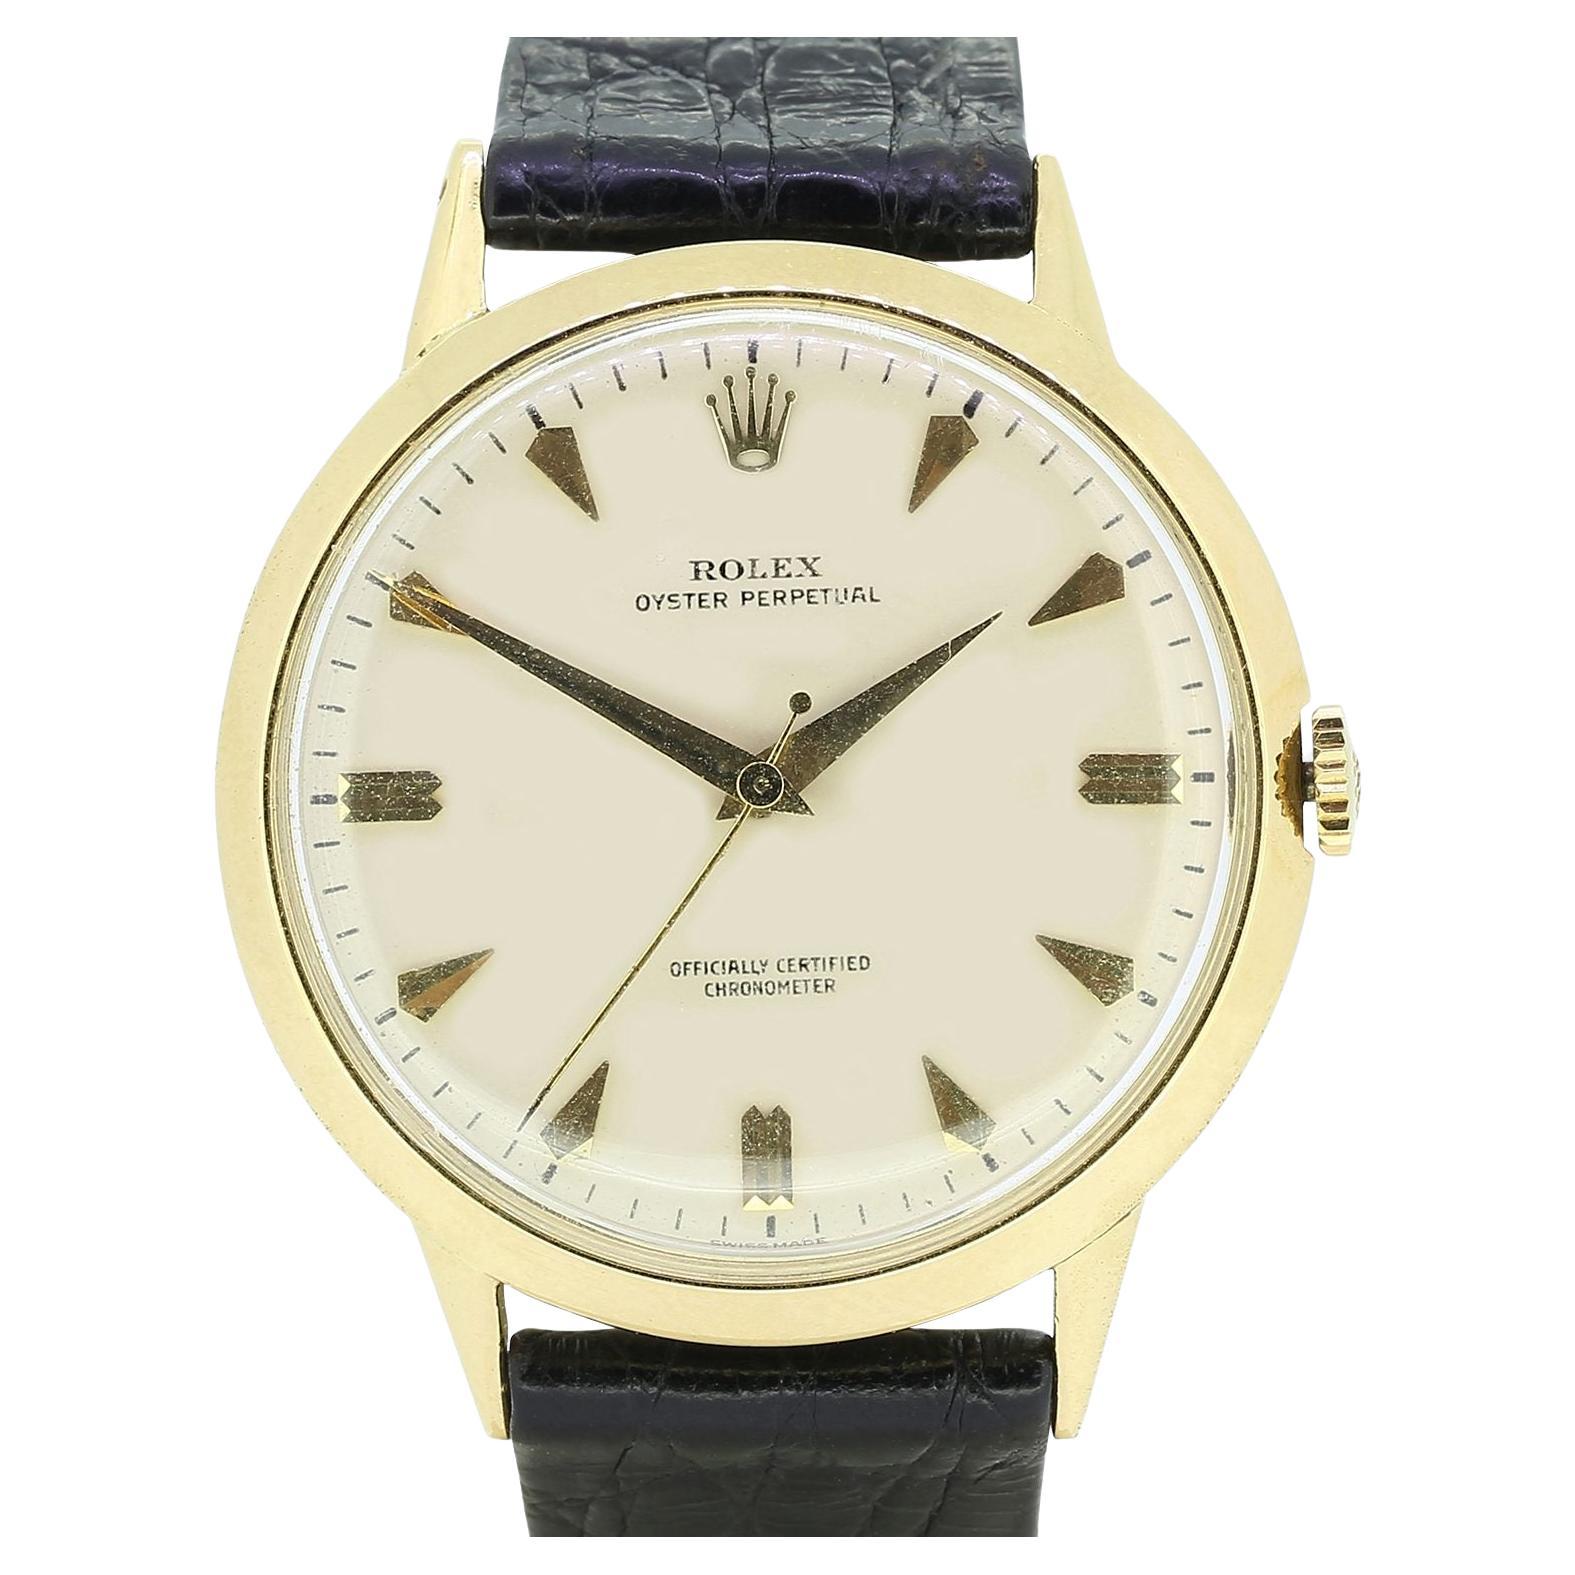 Vintage Rolex Oyster Perpetual Gents Wristwatch For Sale